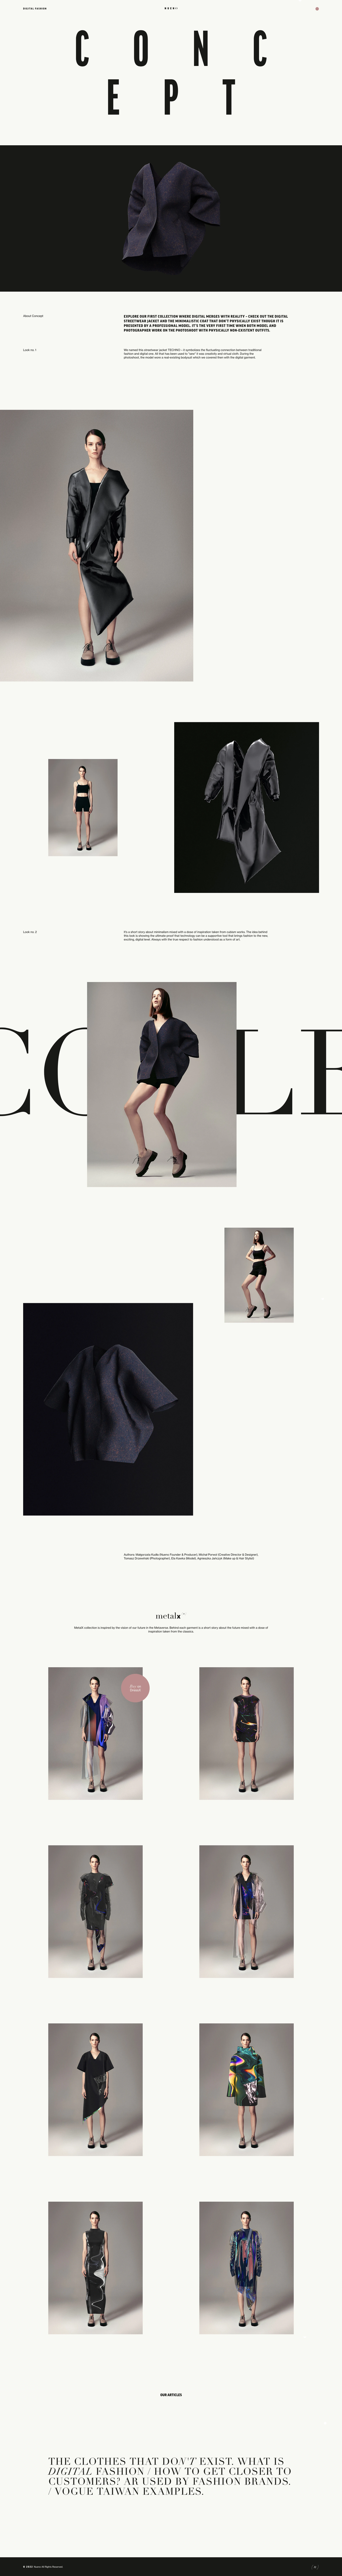 NUENO Landing Page Example: We are a digital fashion house that mixes technology and creativity to take fashion beyond only-physical experiences.